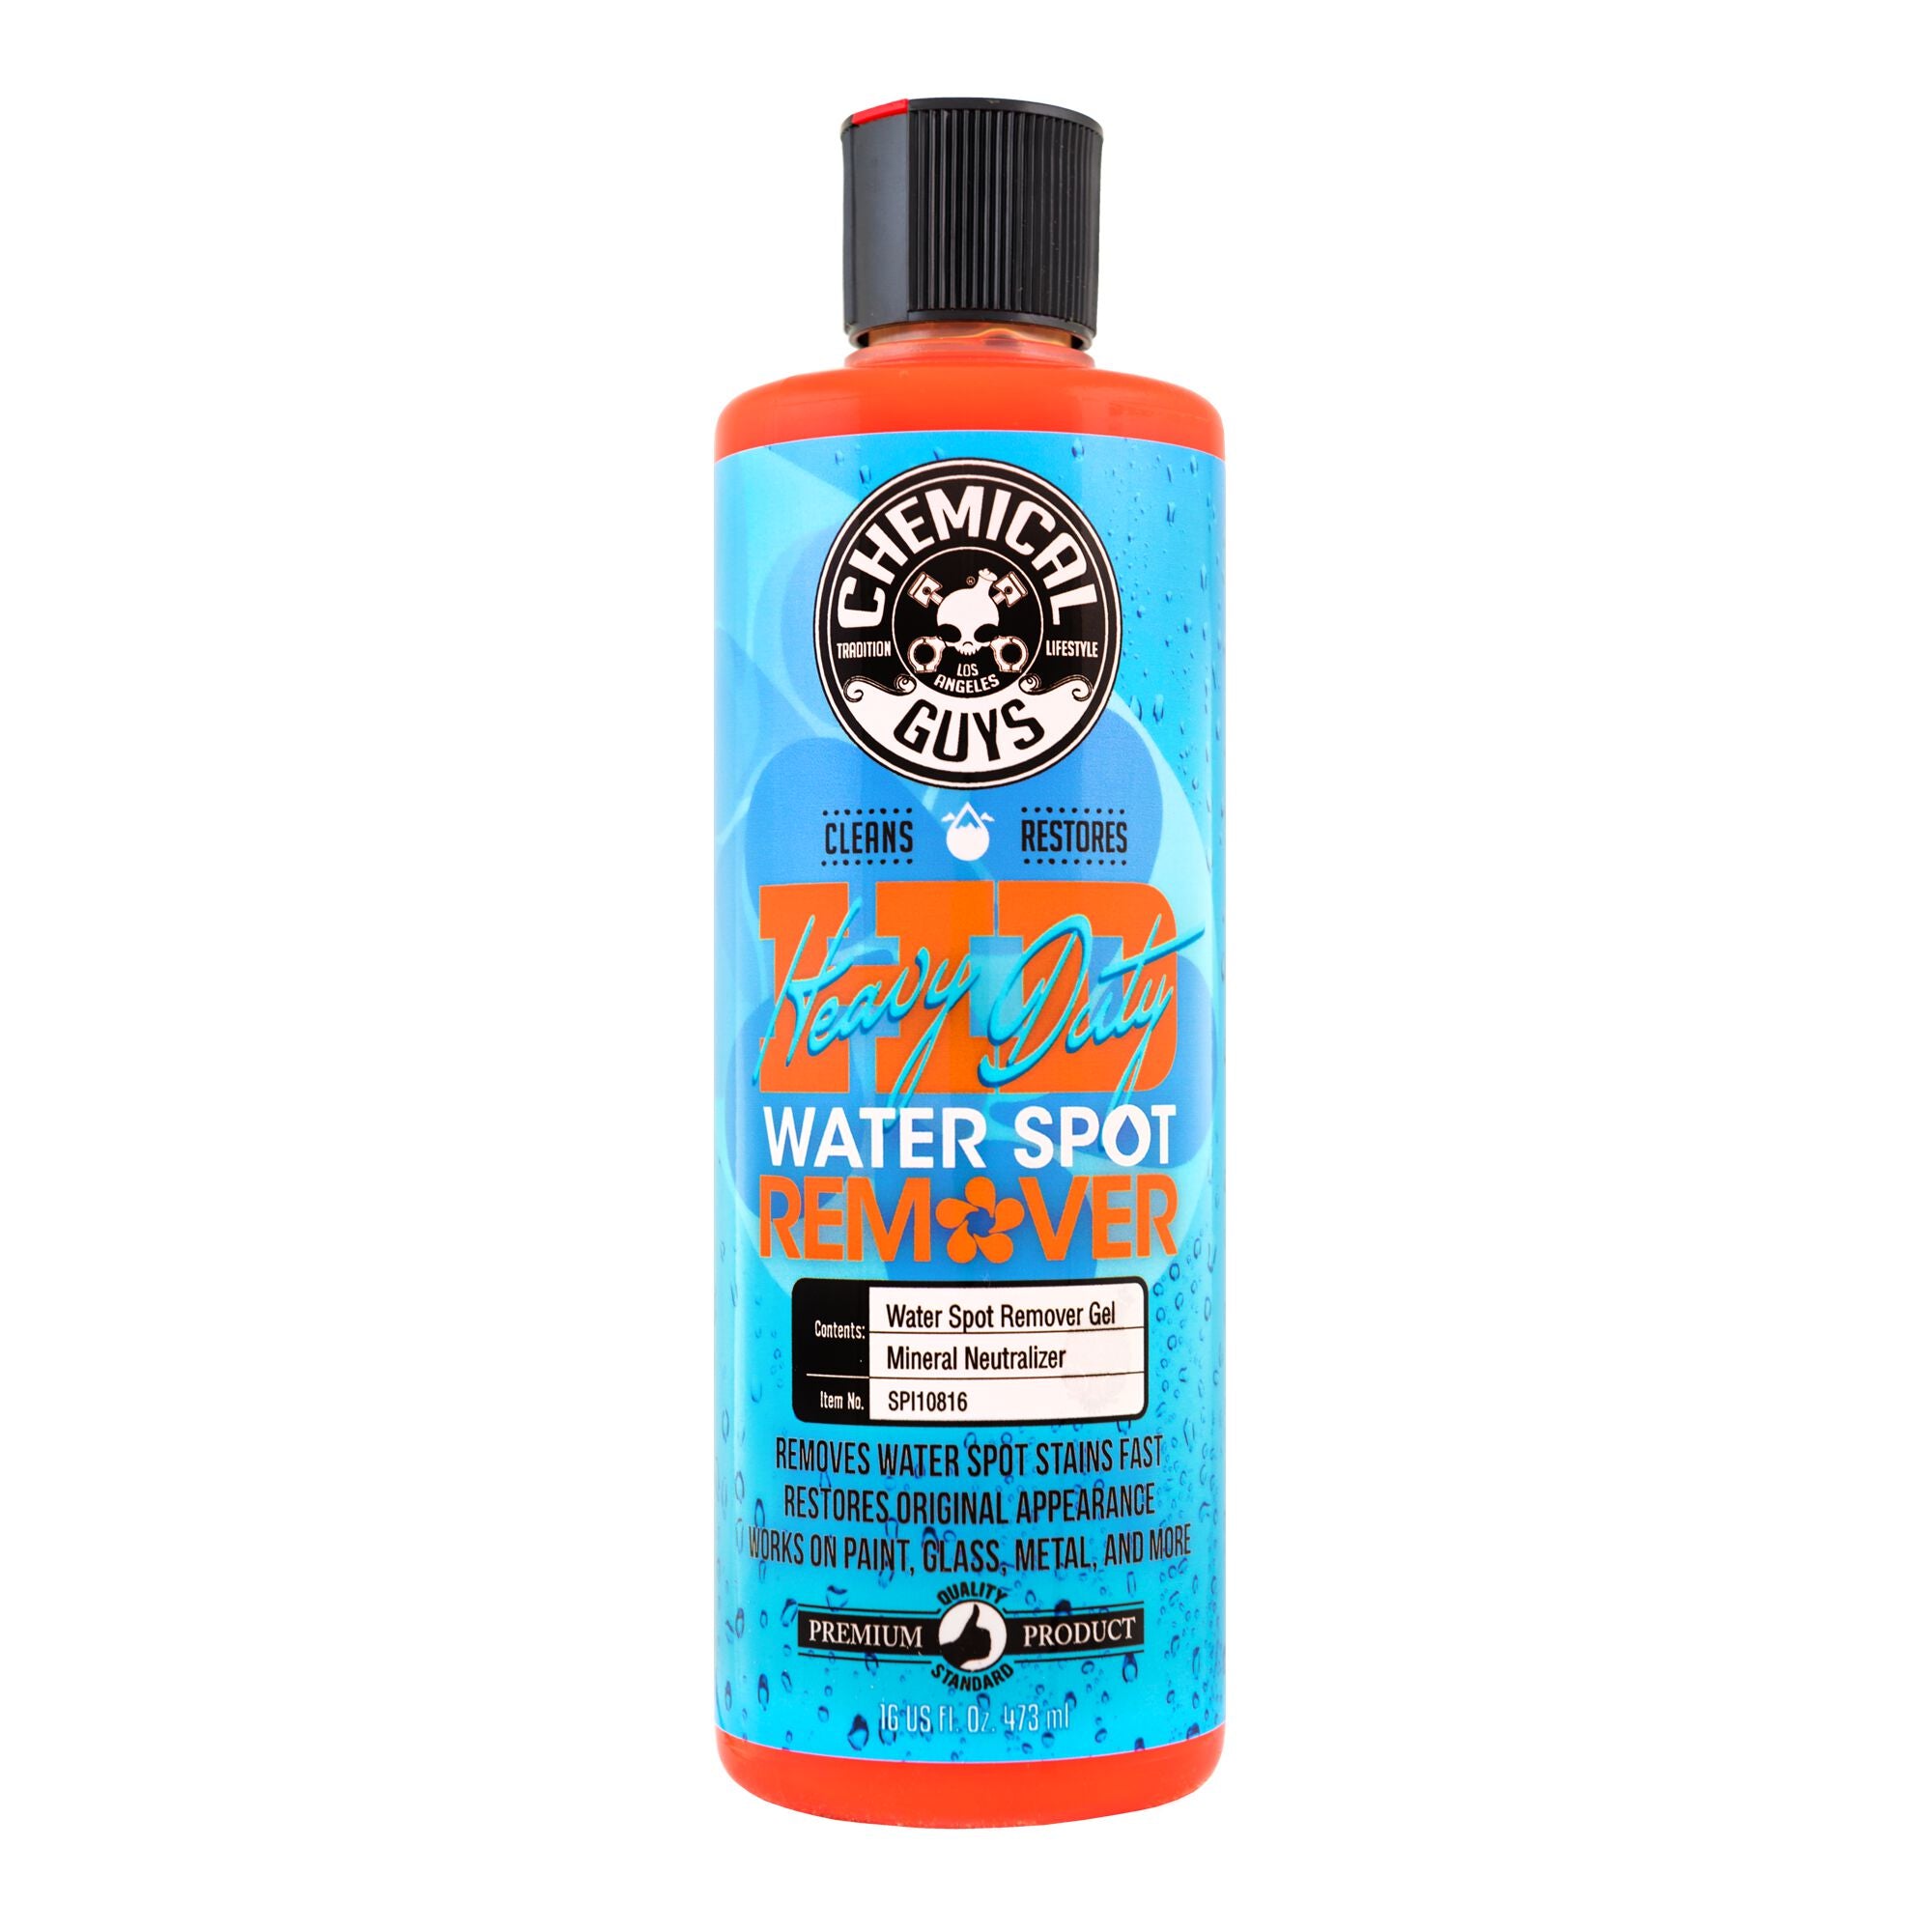 Image 1 of 1 - Heavy Duty Water Spot Remover